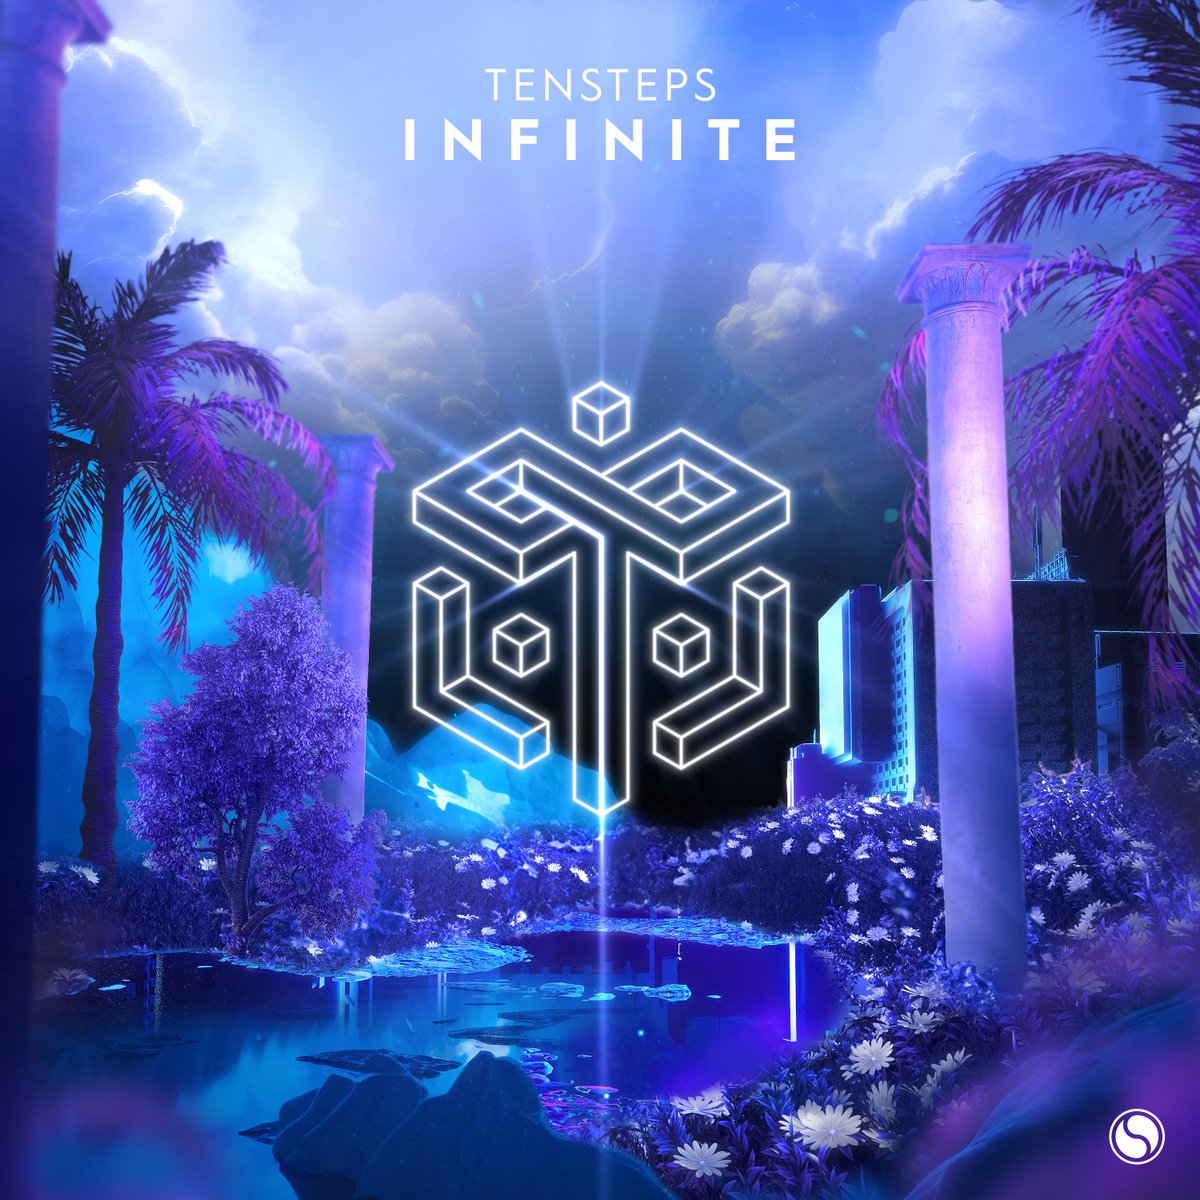 Proud to have the very first independently released artist album on my label, Find Your Harmony ♥️ Your support means the world! Pre-save here: fyh.lsnto.me/fyh001a_infini…